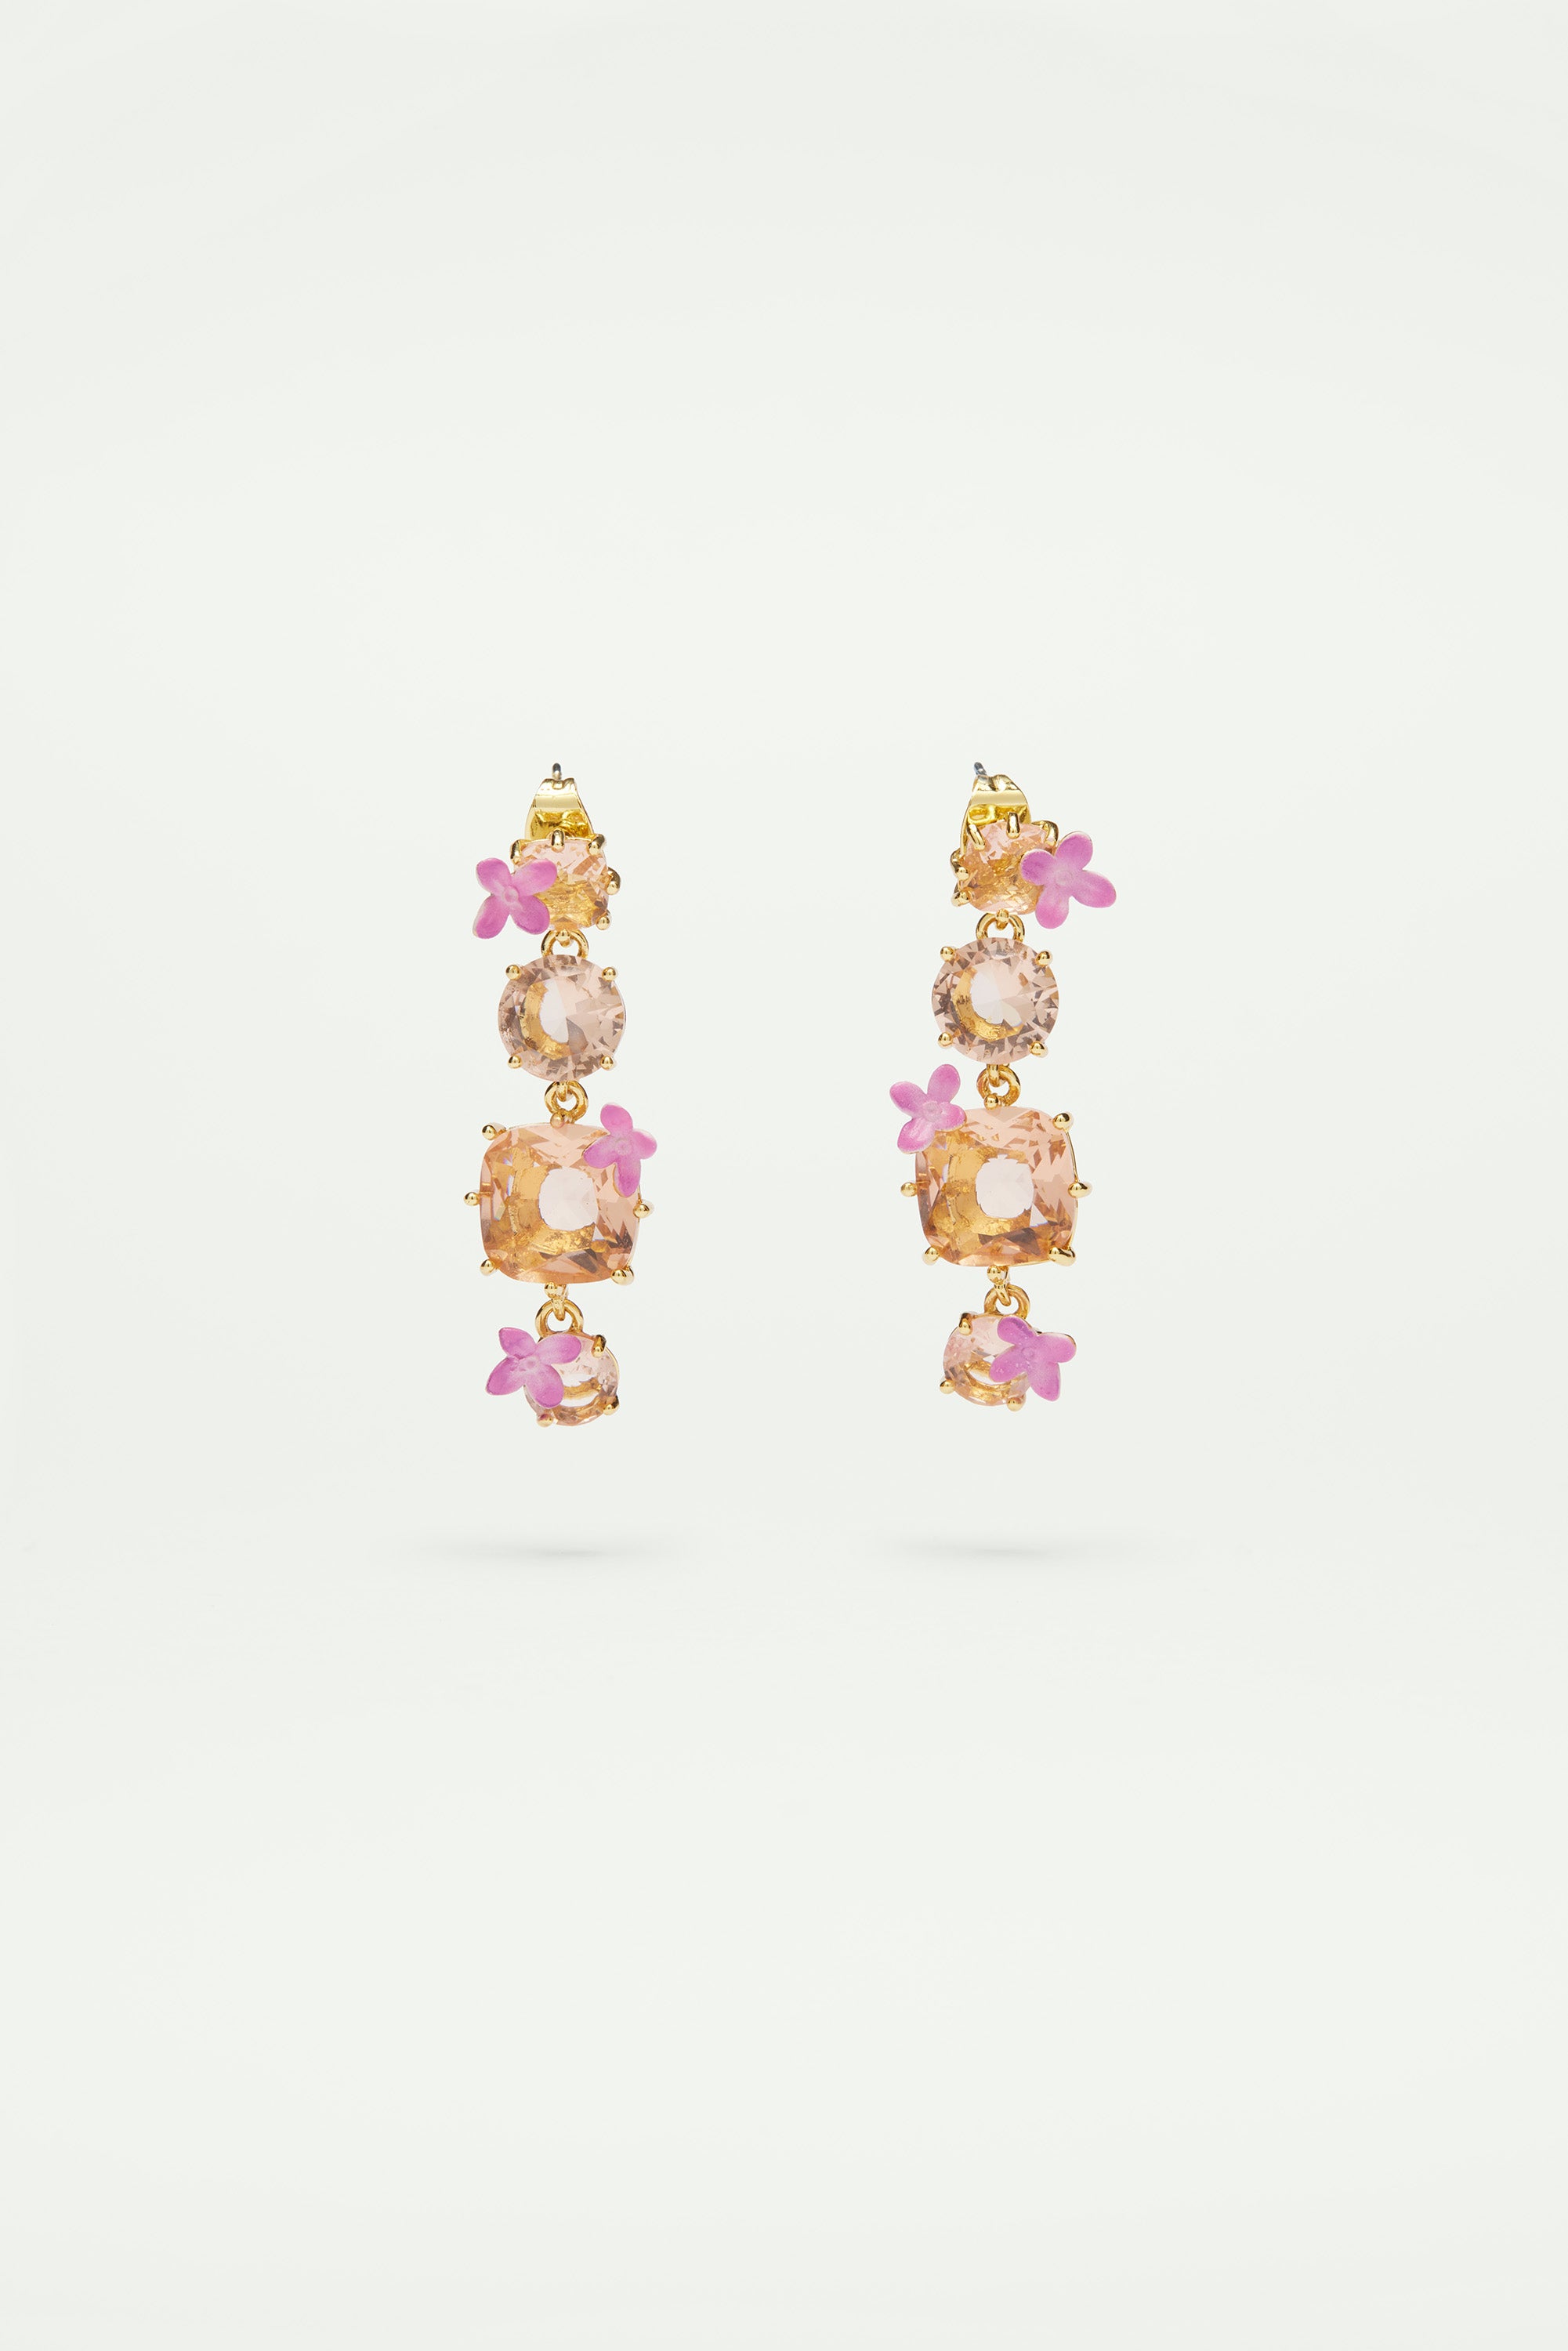 Apricot pink diamantine 4 stone and flower dangling post earrings